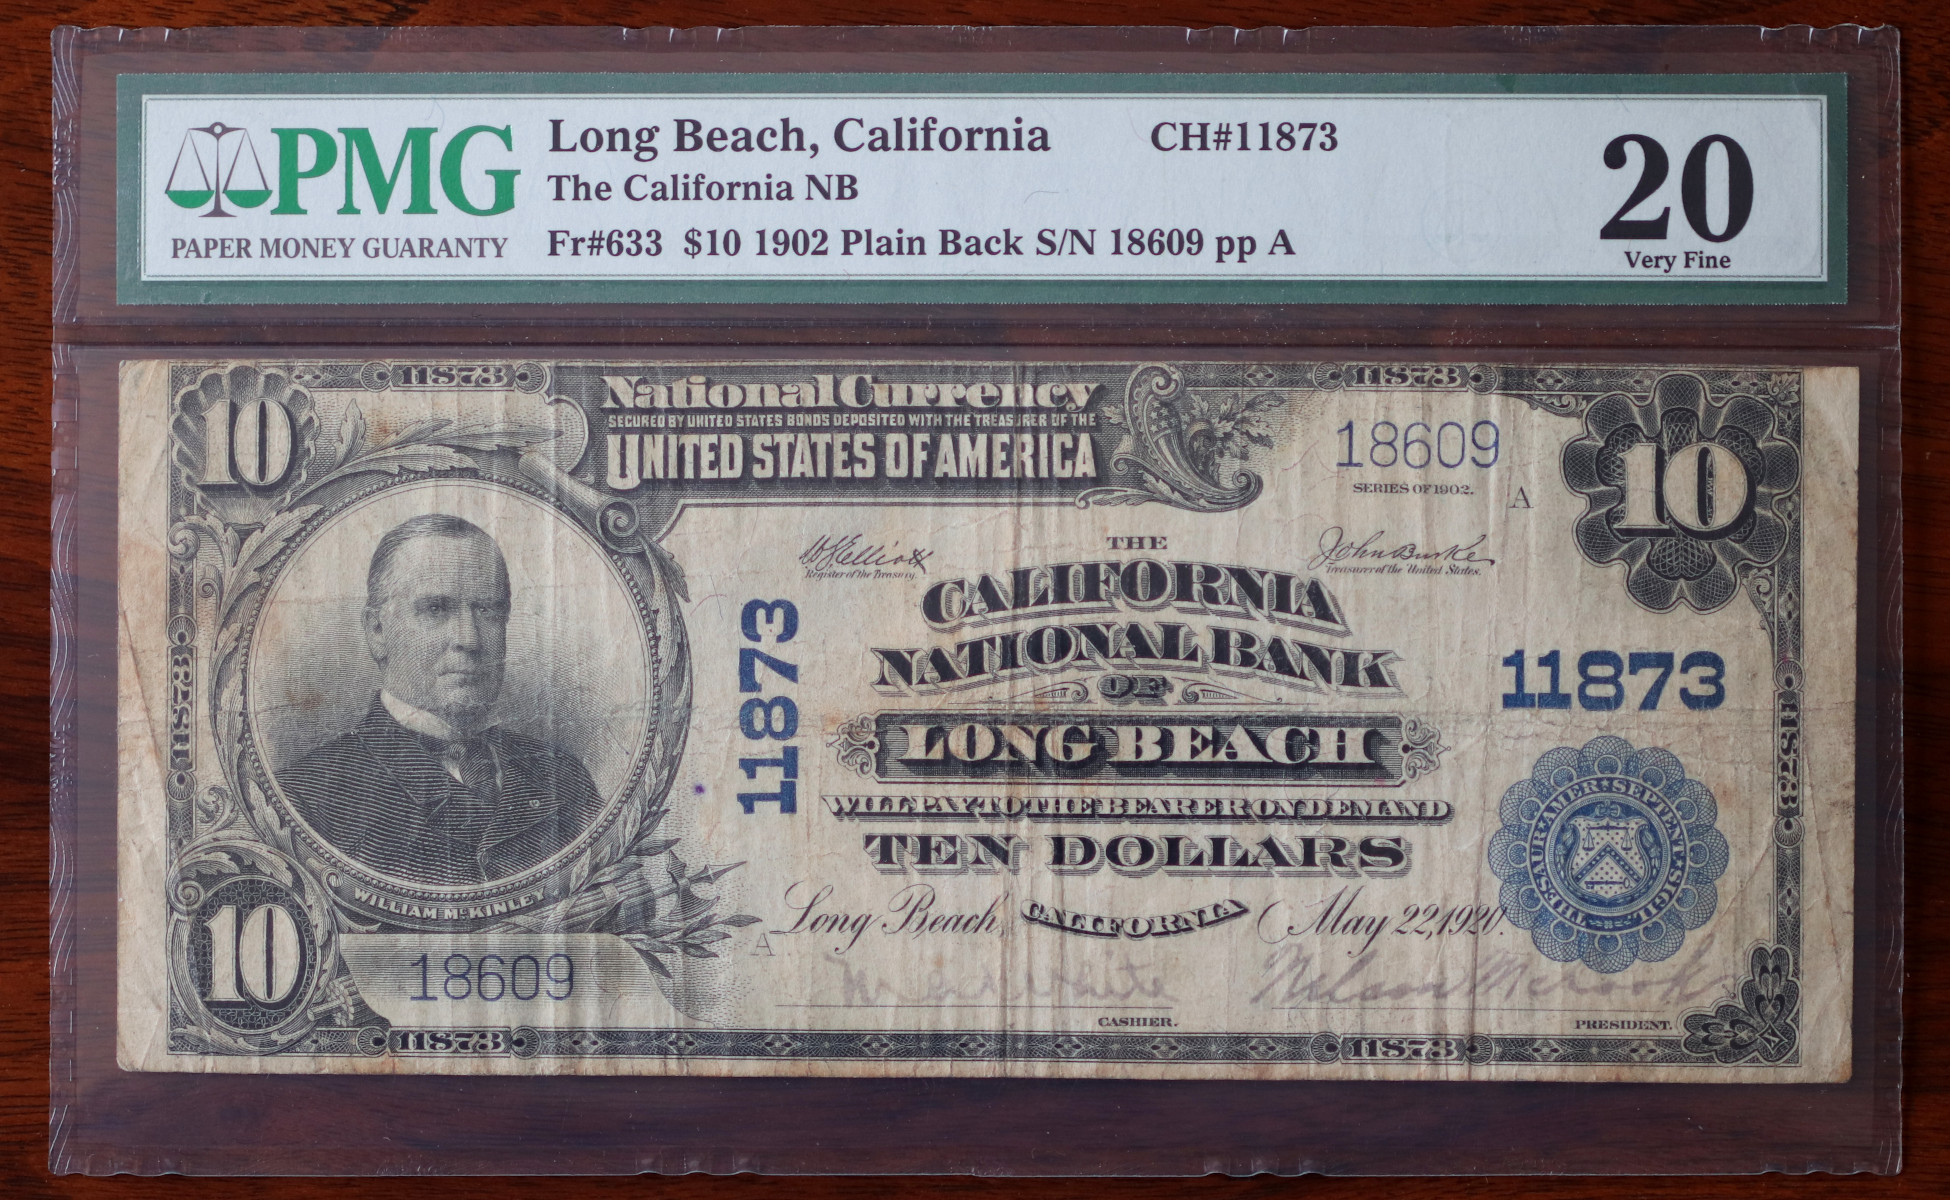 A $10 National Bank Note, Long Beach, certified PMG Very Fine 20, from The South Bay Collection of Rare National Bank Notes, offered by Palos Verdes Coin Exchange